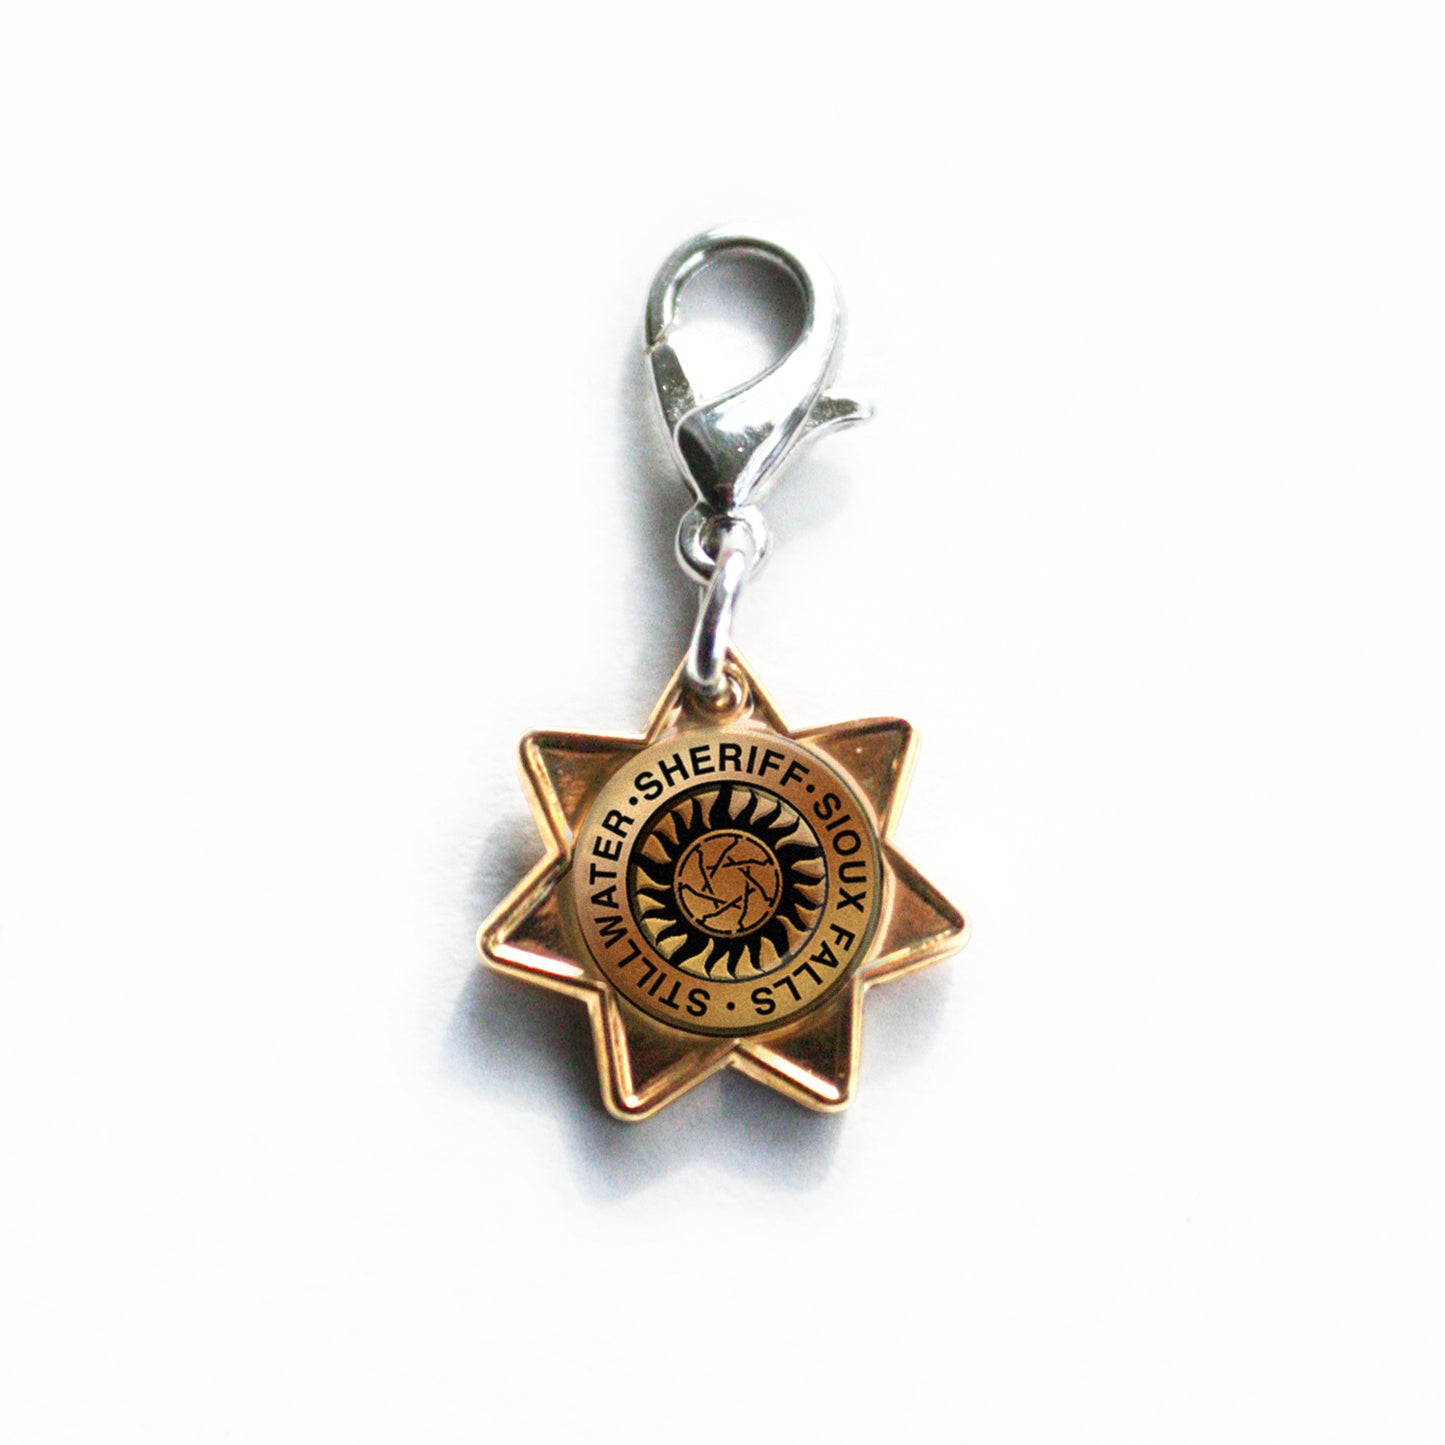 A brass charm in the shape of a Sheriff's badge. On the badge is a small anti-possession symbol encircled by the words SHERIFF - SIOUX FALLS - STILLWATER. The charm is on a silver bracelet/keychain clip. 